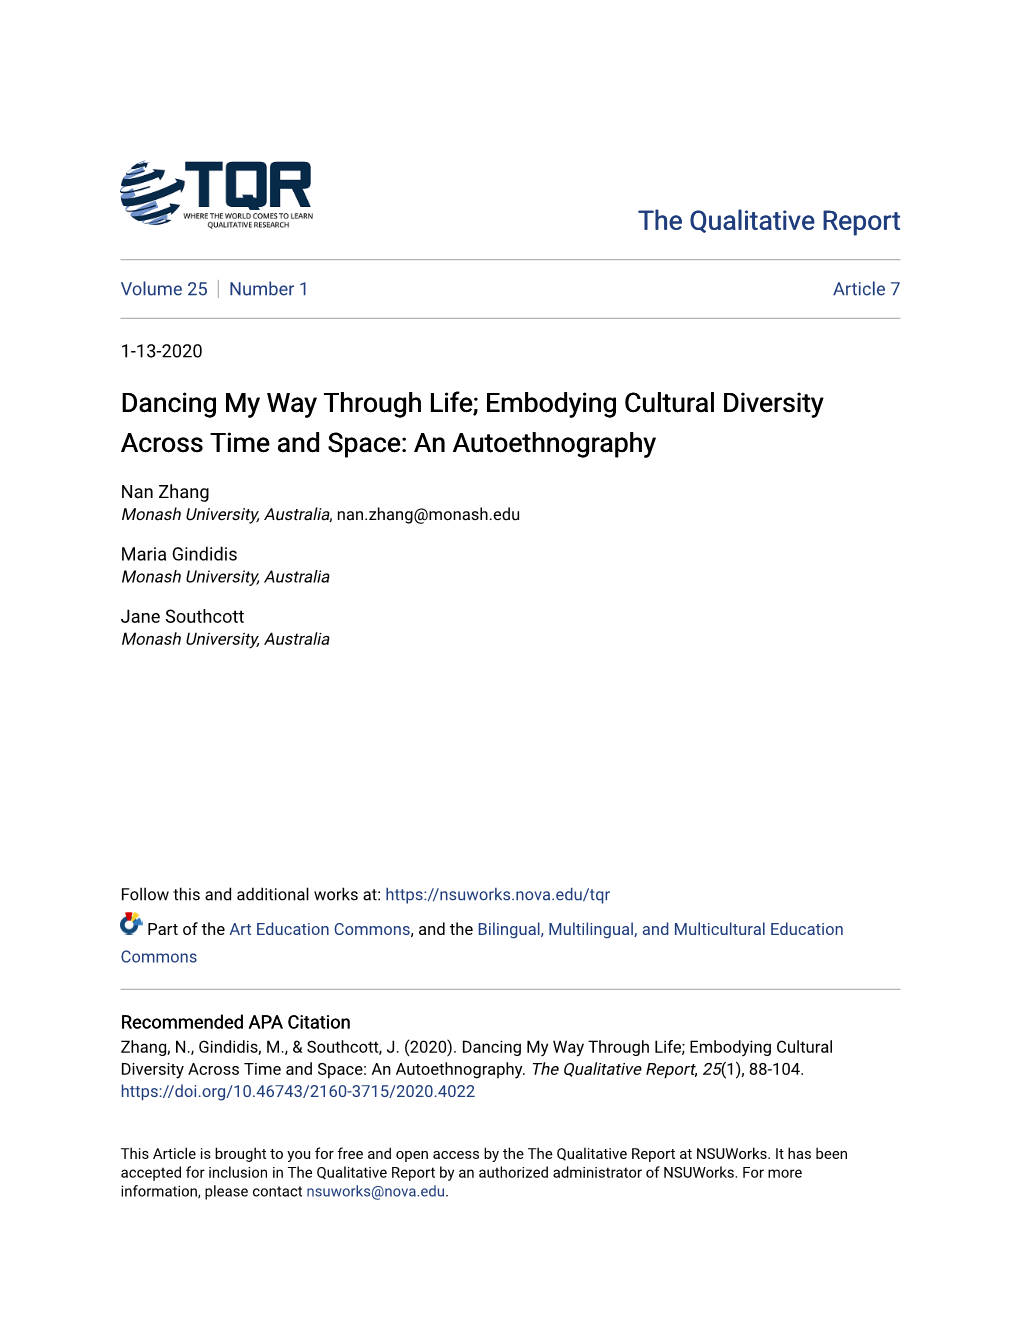 Dancing My Way Through Life; Embodying Cultural Diversity Across Time and Space: an Autoethnography